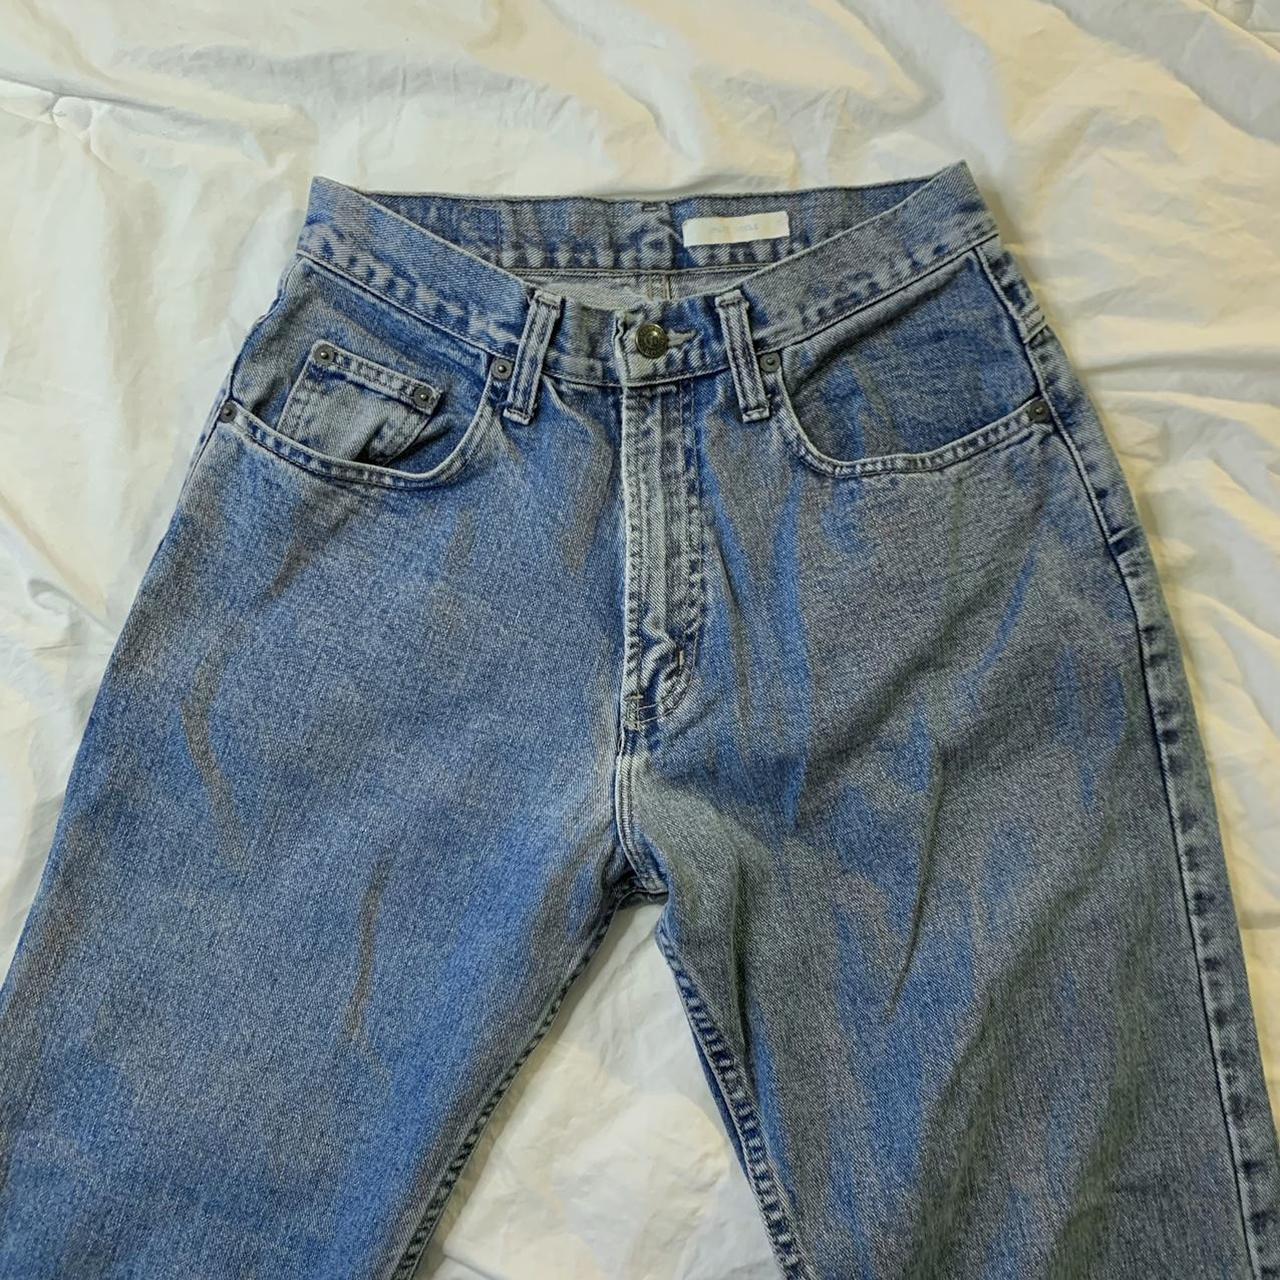 mossimo high waisted jeans , size 29 - Depop